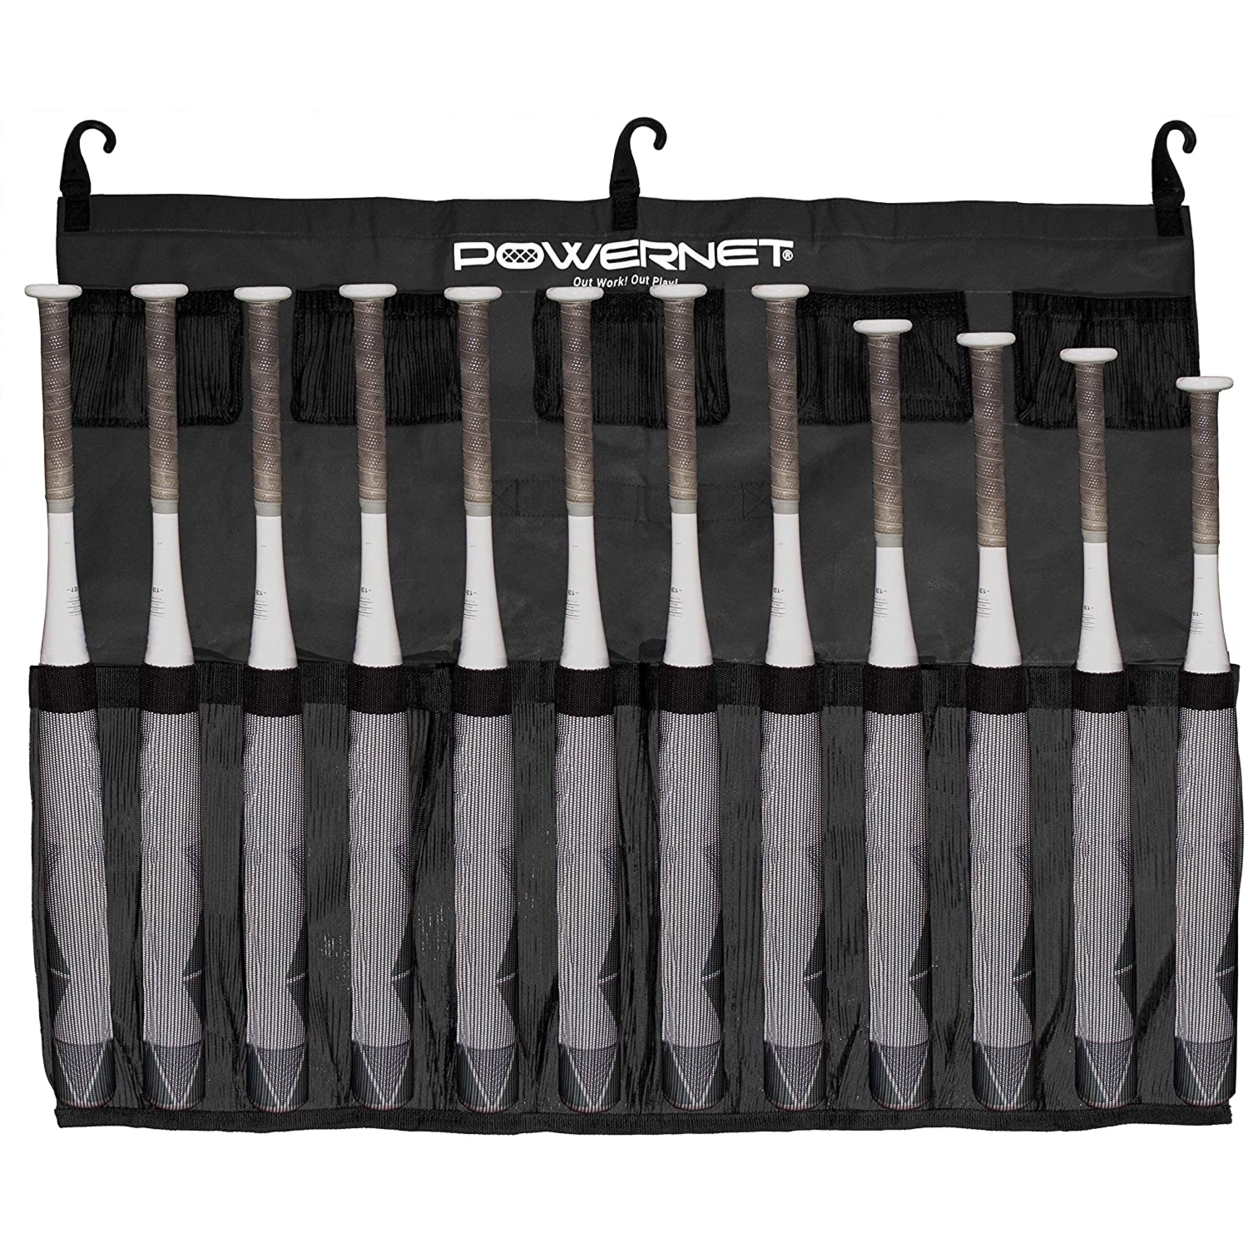 PowerNet Hanging Bat Bag Caddy For Hanging Up To 12 Bats On Fence (1169) - Black